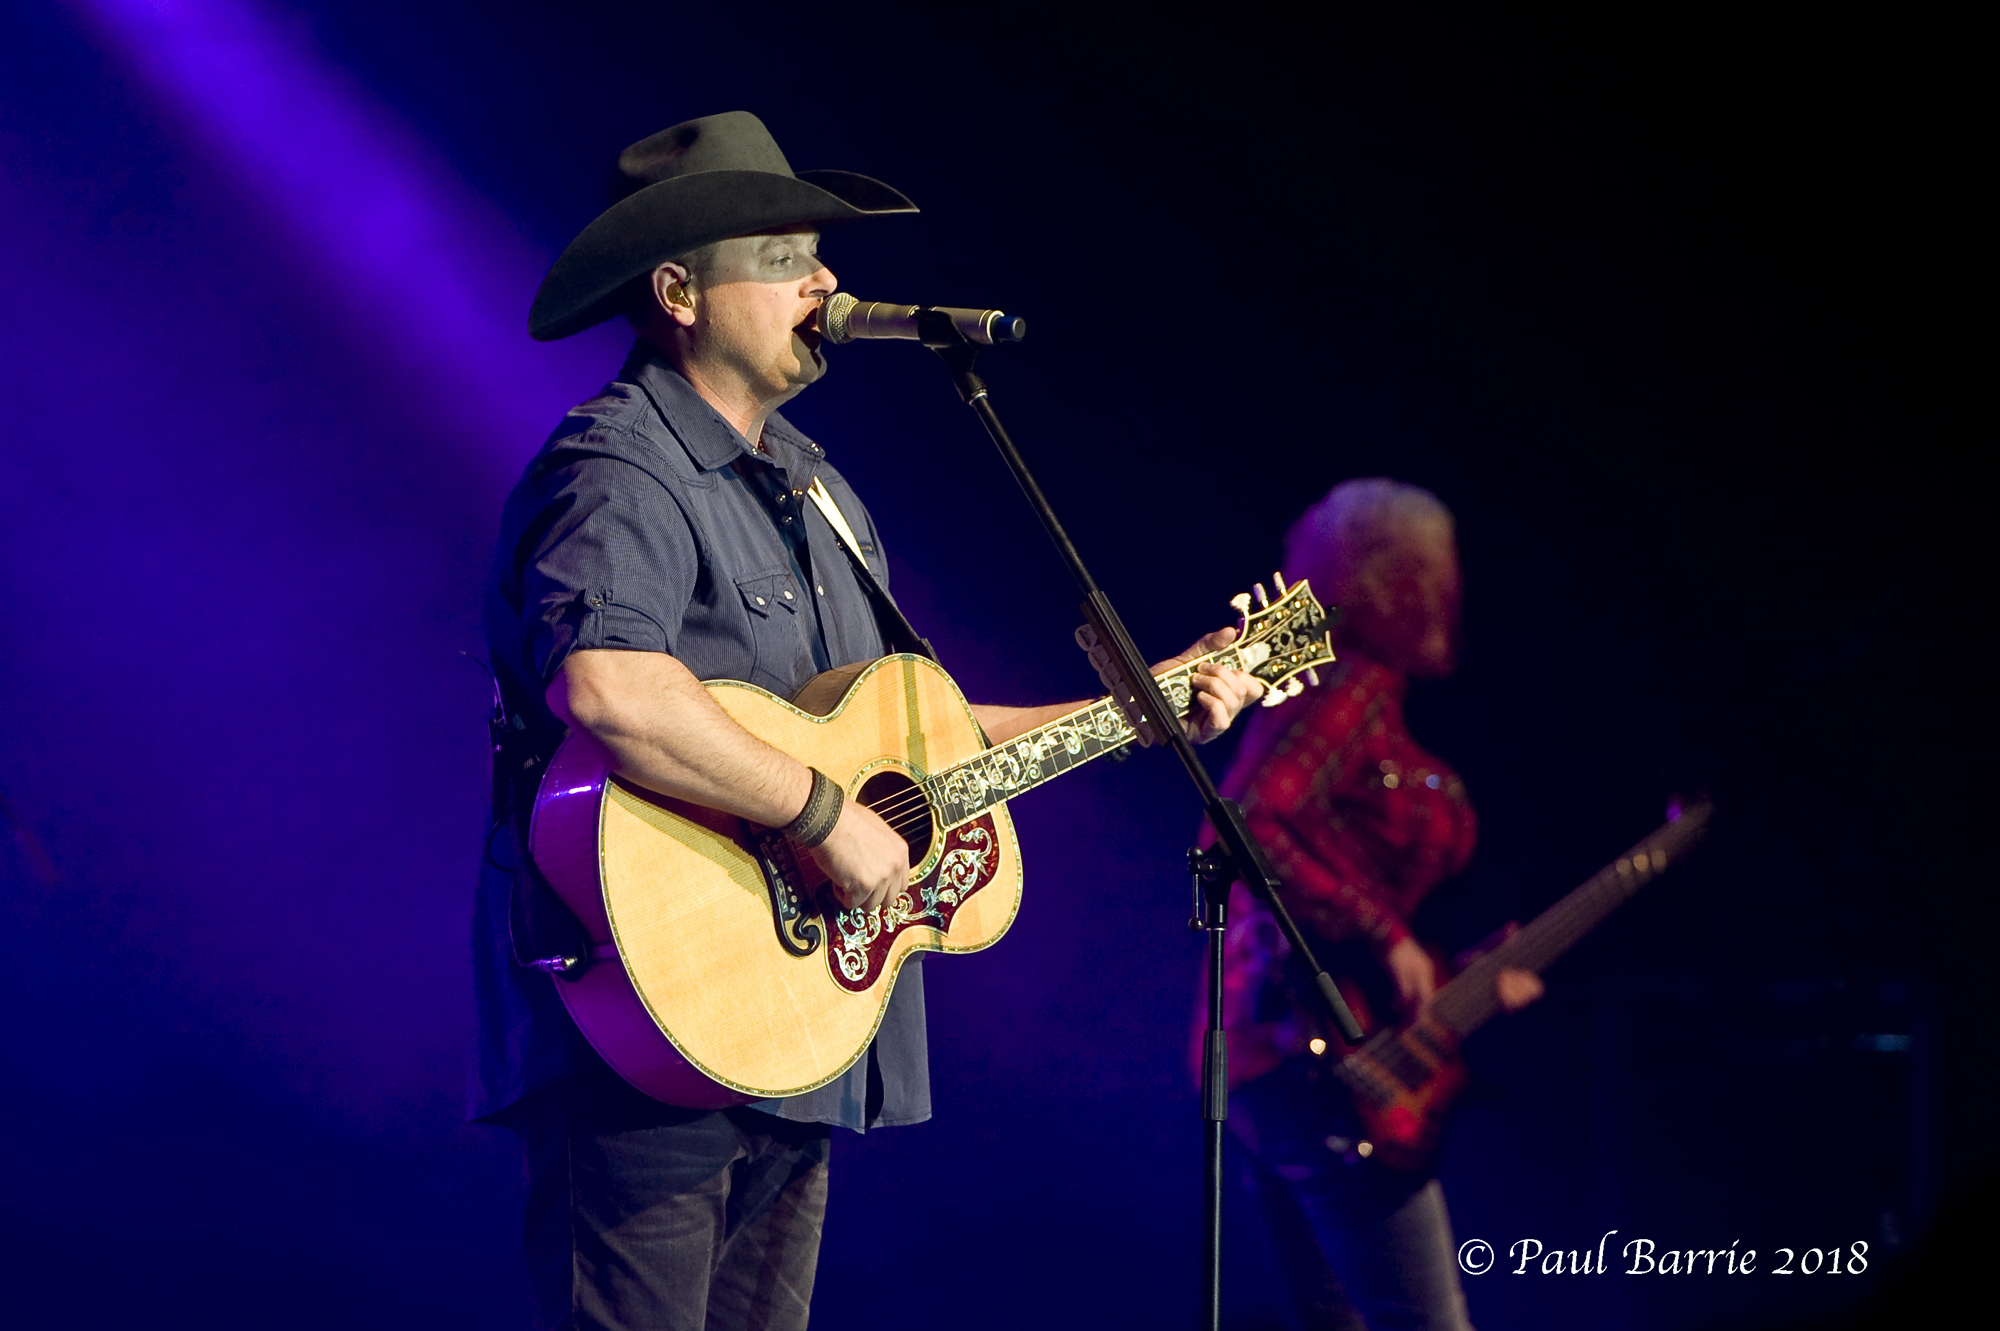 Gord Bamford with Aaron Goodvin at the Sanderson Centre for the Performing Arts ...2000 x 1331